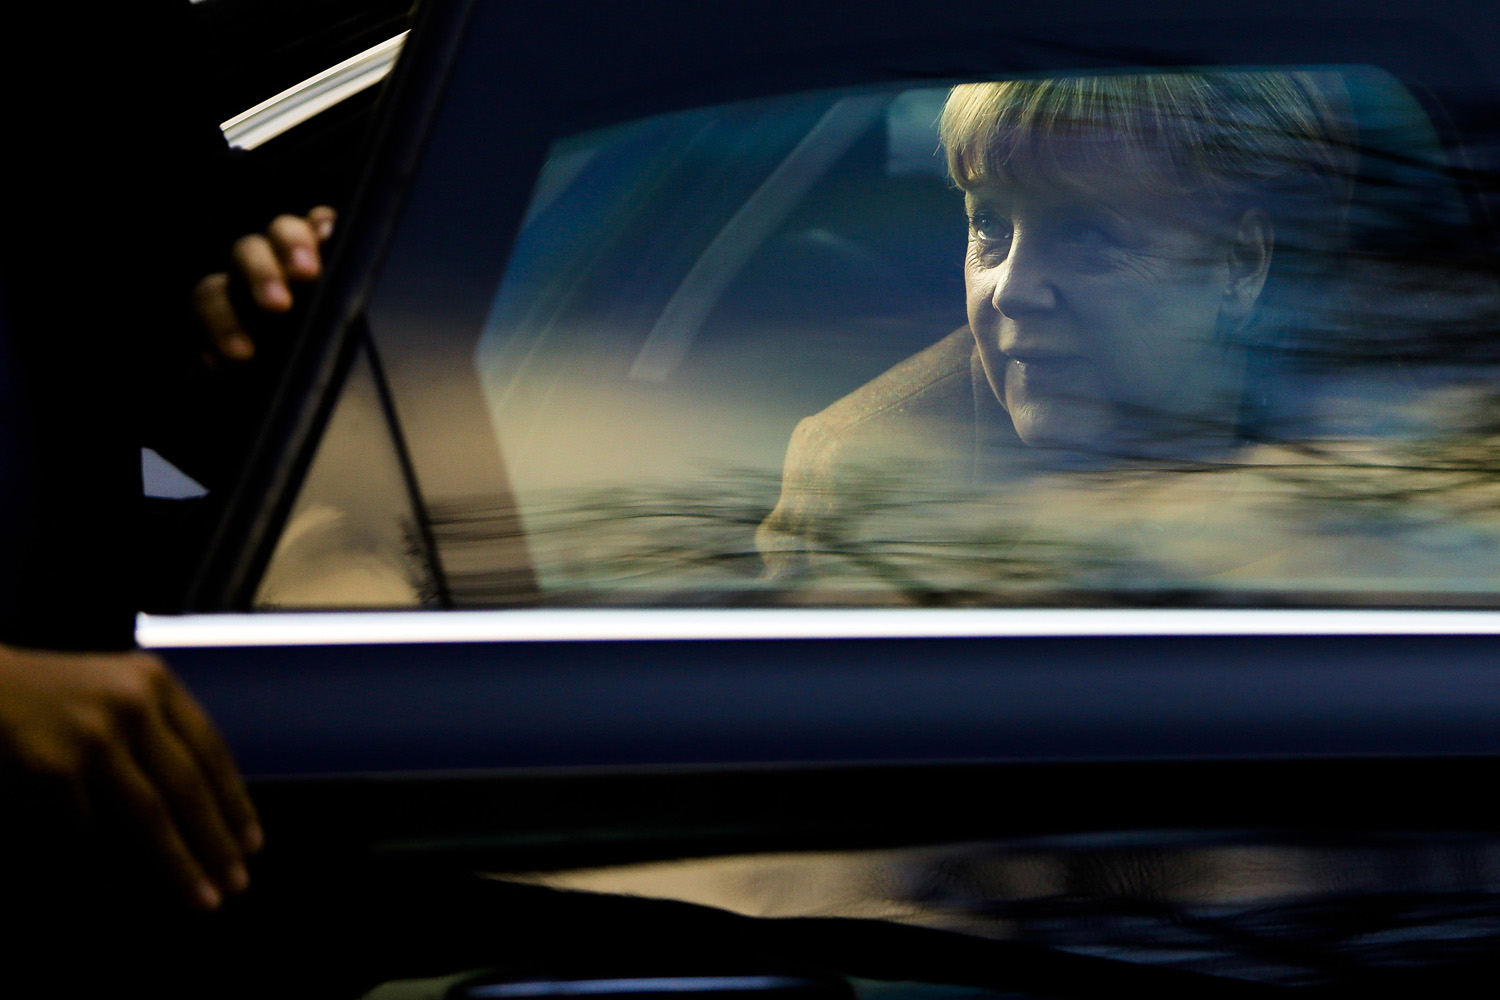 Oct. 30, 2013. The chairwoman of the Christian Democratic Union  Party, CDU, German Chancellor Angela Merkel arrives at the Social Democratic Party's, SPD, headquarters for coalition talks in Berlin.